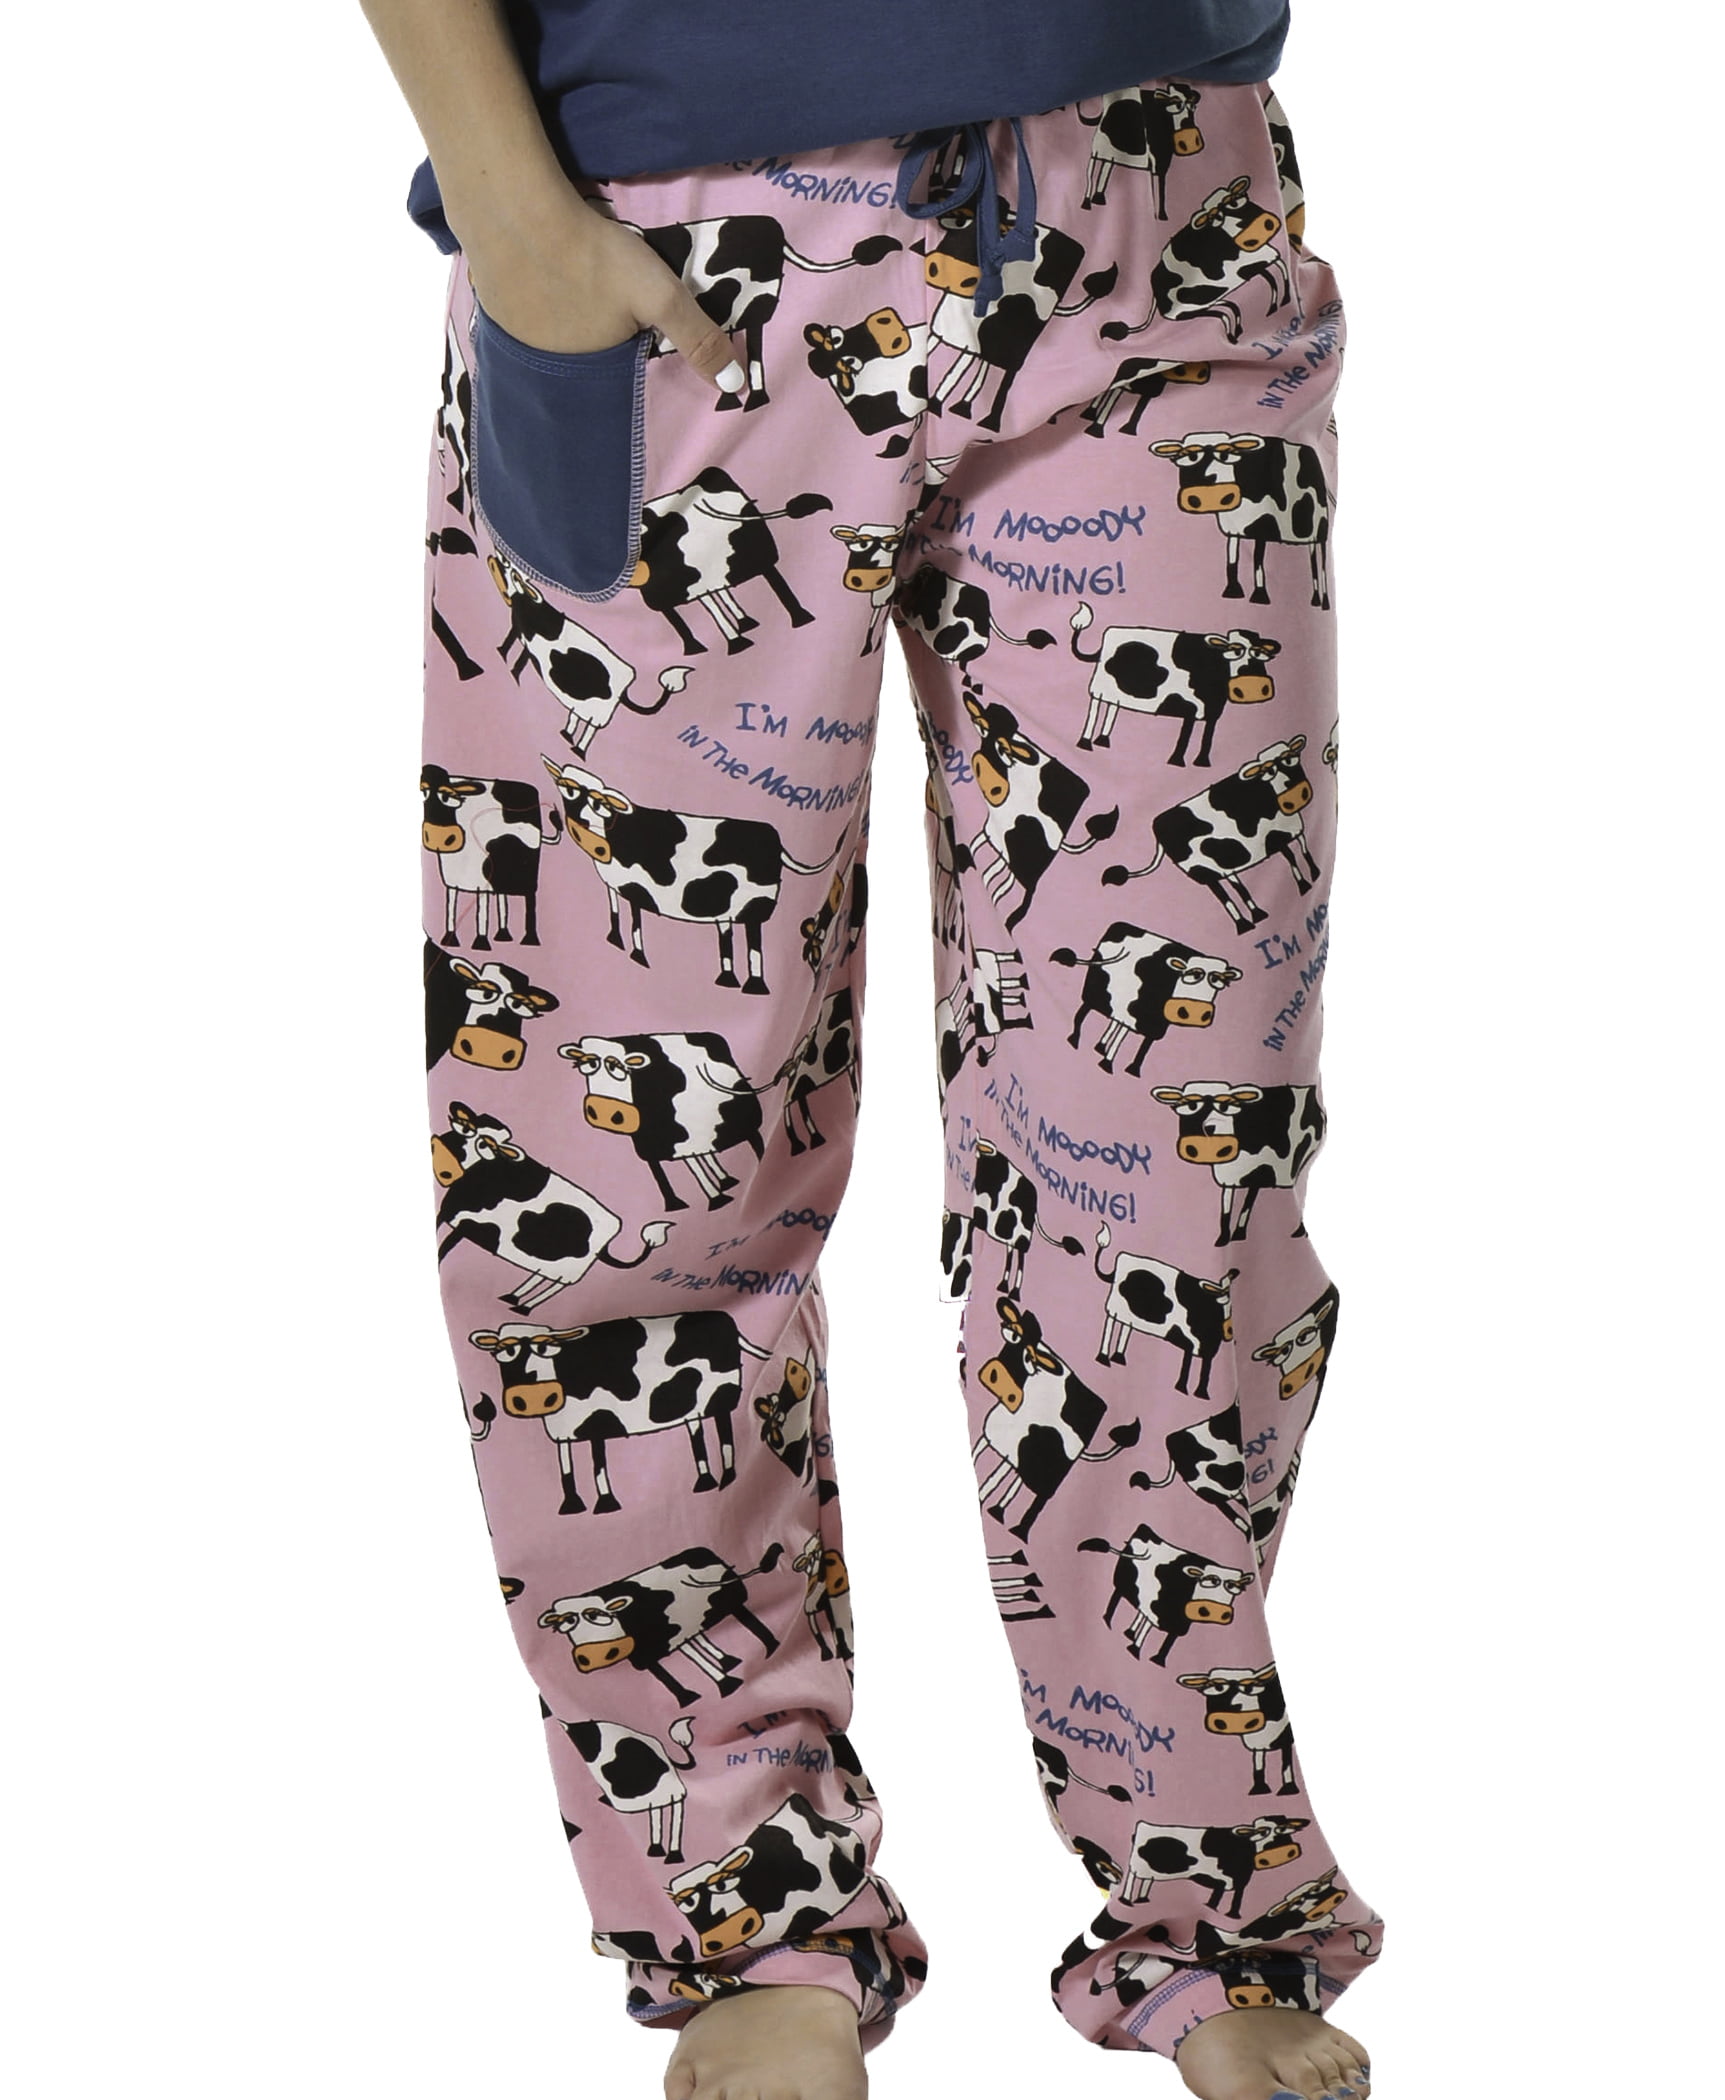 Cute Pajama Shorts and Top Separates Lazy One Animal Pajamas for Women